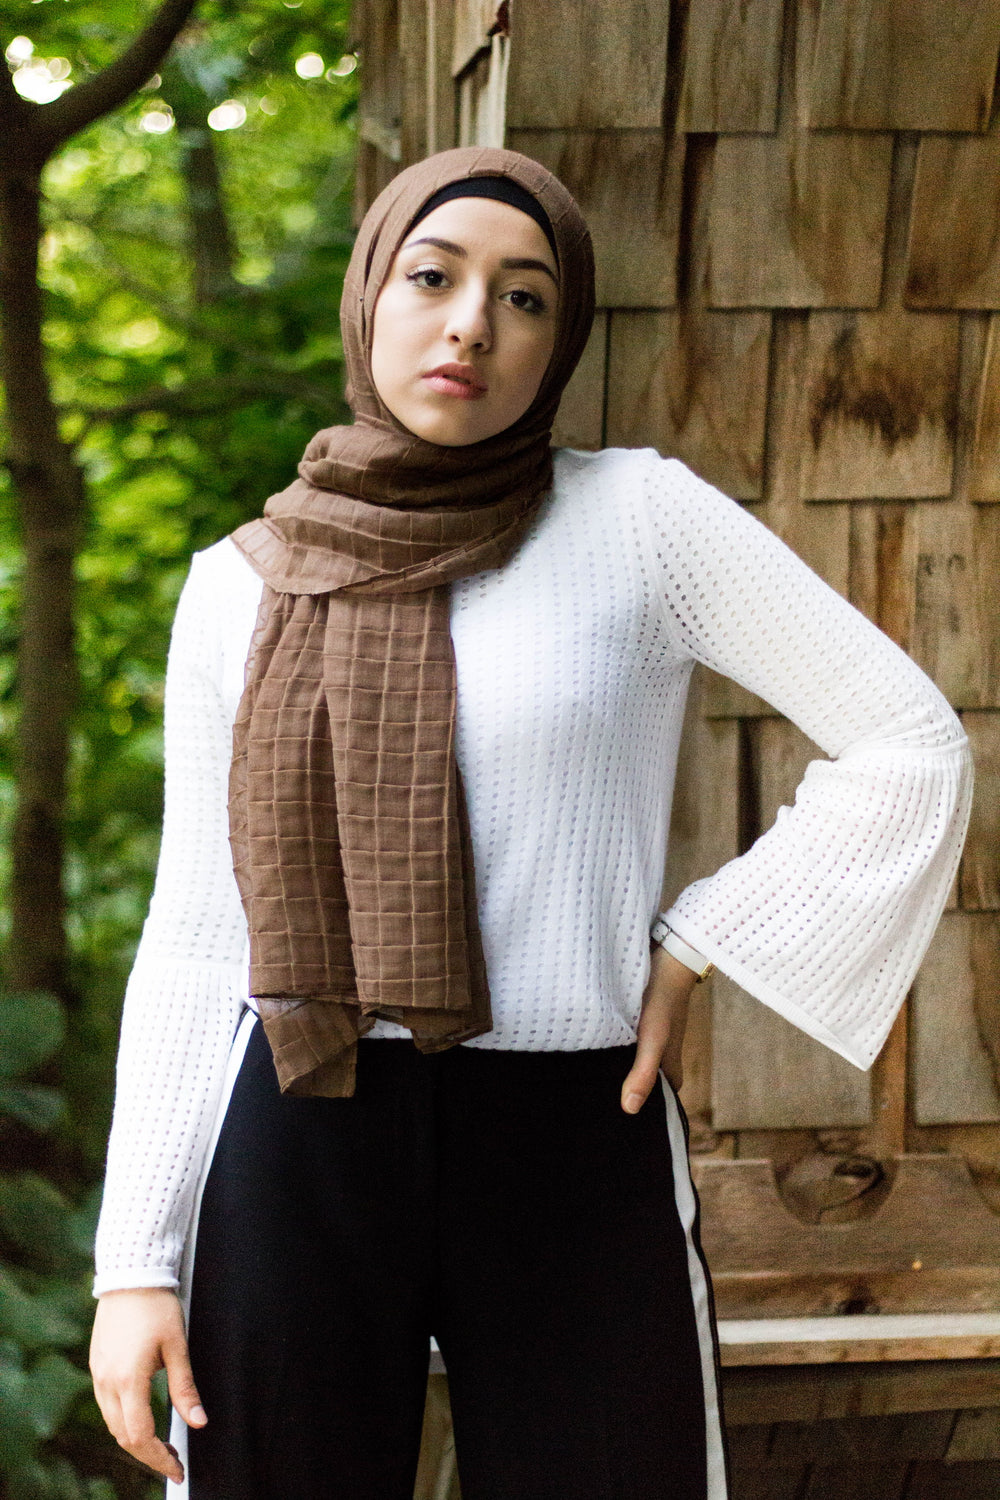 muslim woman wearing a white textured top and black pants with a mocha brown color textured hijab